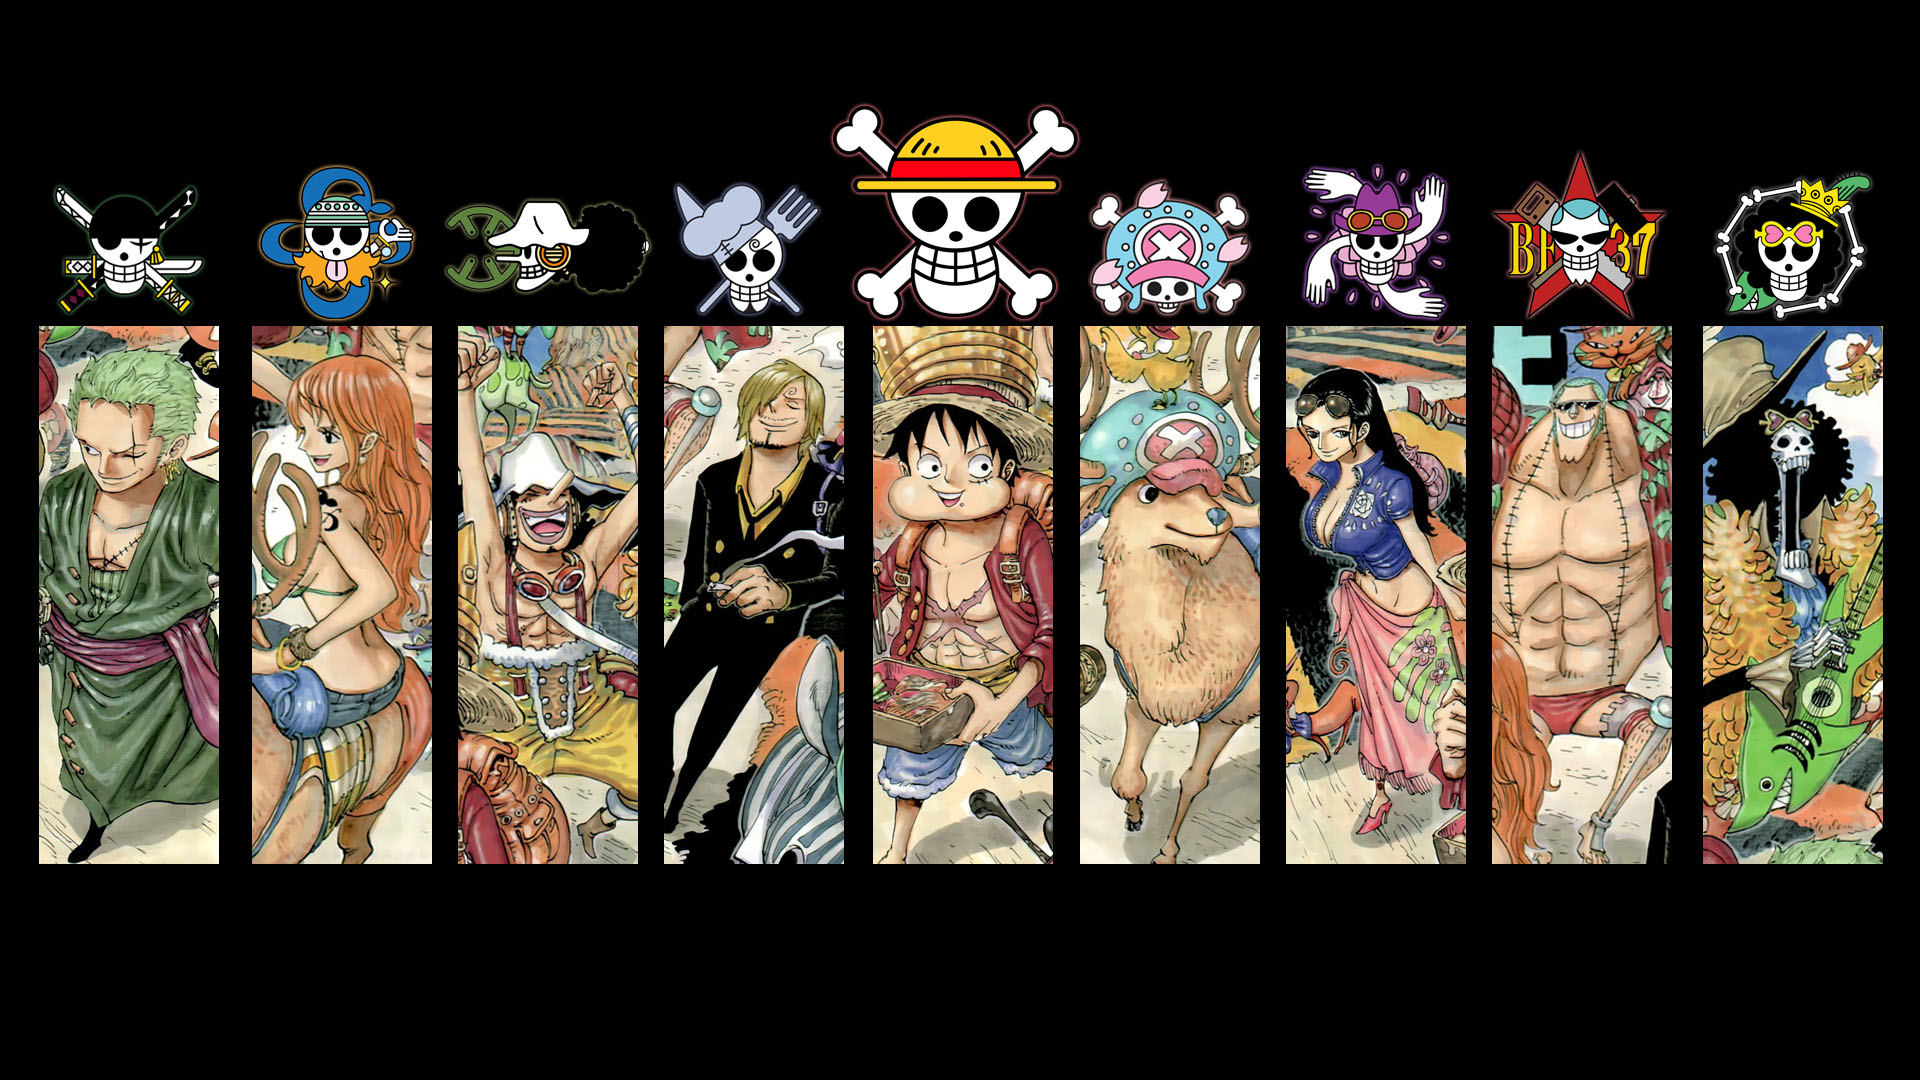 Free Download One Piece Gtgt Download One Piece Wallpaper 7 12 19x1080 For Your Desktop Mobile Tablet Explore 77 Wallpaper For One Piece 4k One Piece Wallpaper One Piece